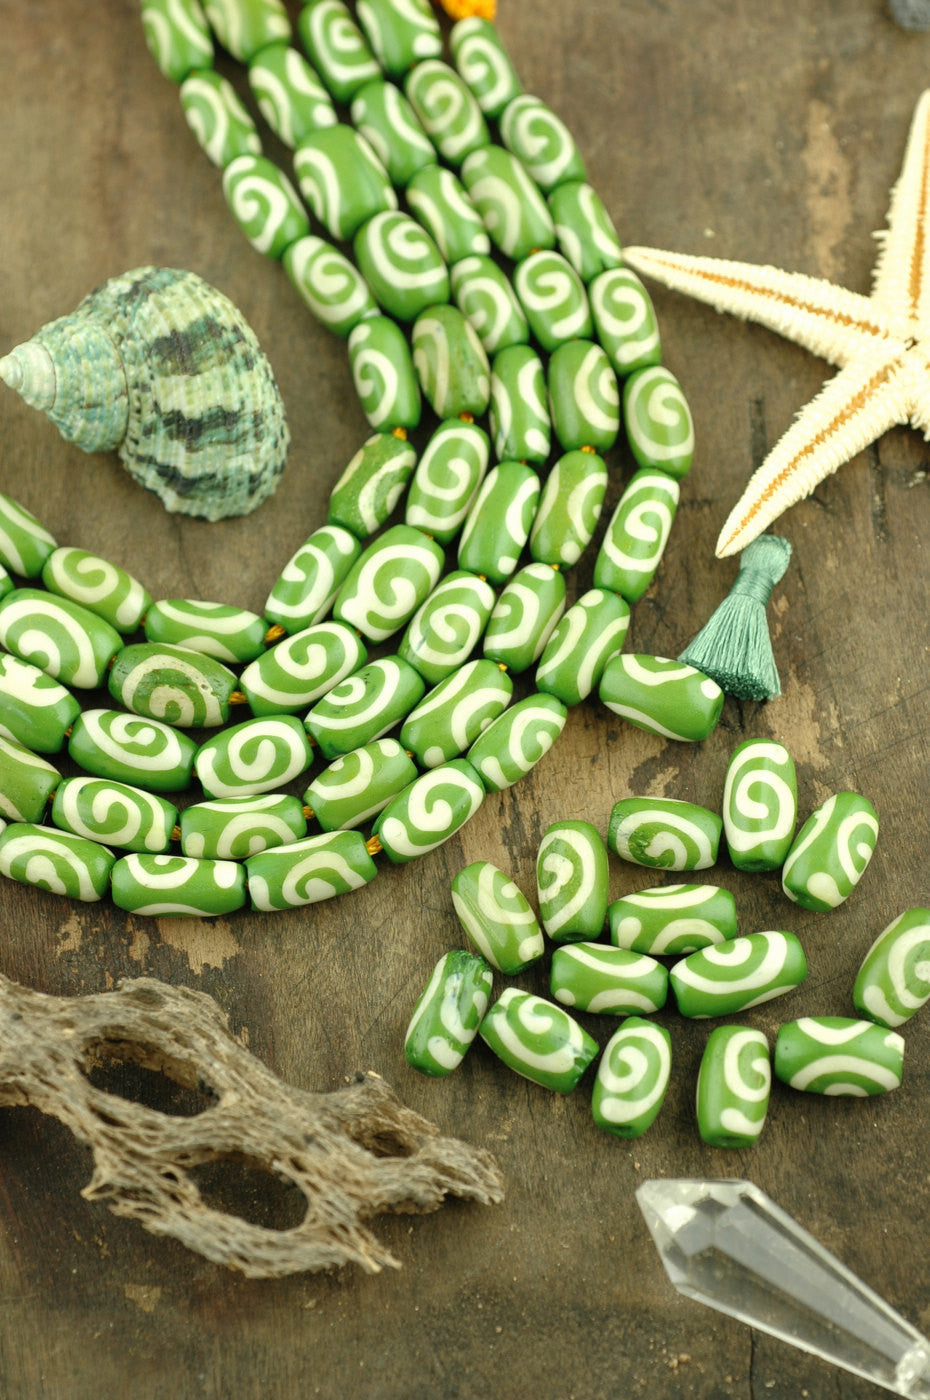 Green Barrel: Large Hole Hand Painted Spiral Design Bone Tube Beads, 6x12mm, Stained, Painted Cow Bone, Craft, Jewelry Making Supply, 15 pcs - ShopWomanShopsWorld.com. Bone Beads, Tassels, Pom Poms, African Beads.